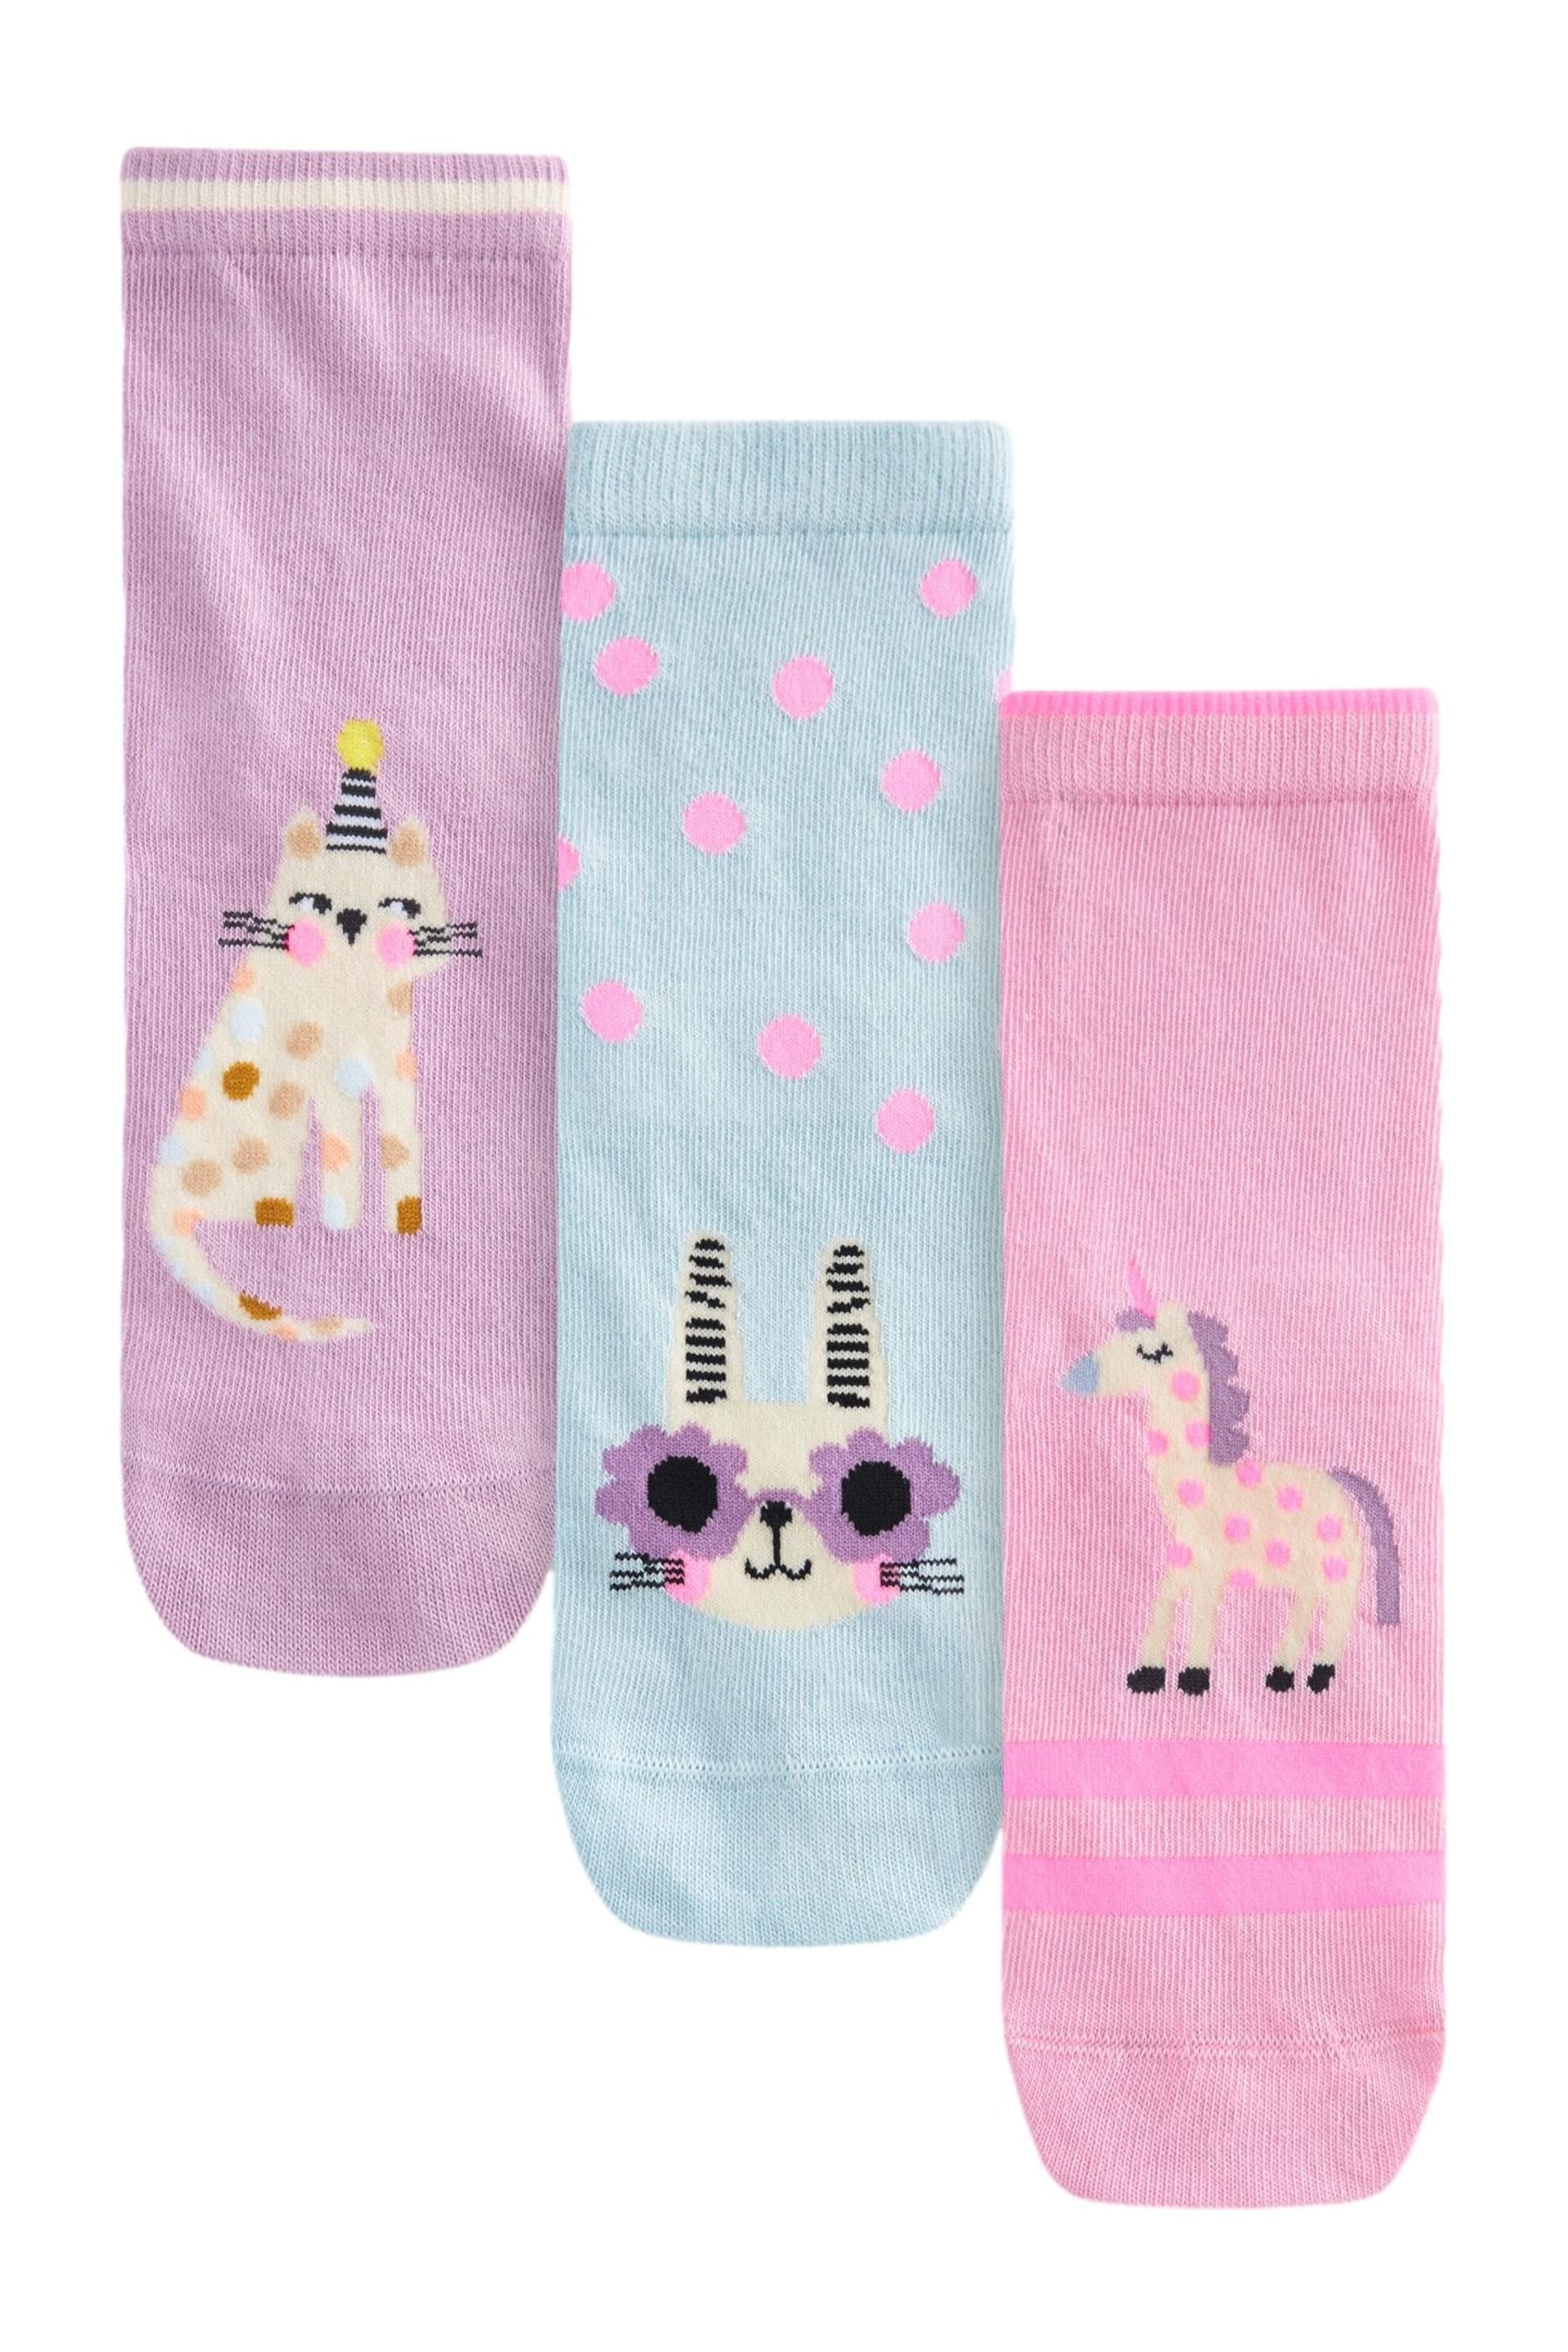 Multi Cotton Rich Character Ankle Socks 3 Pack - Image 1 of 4